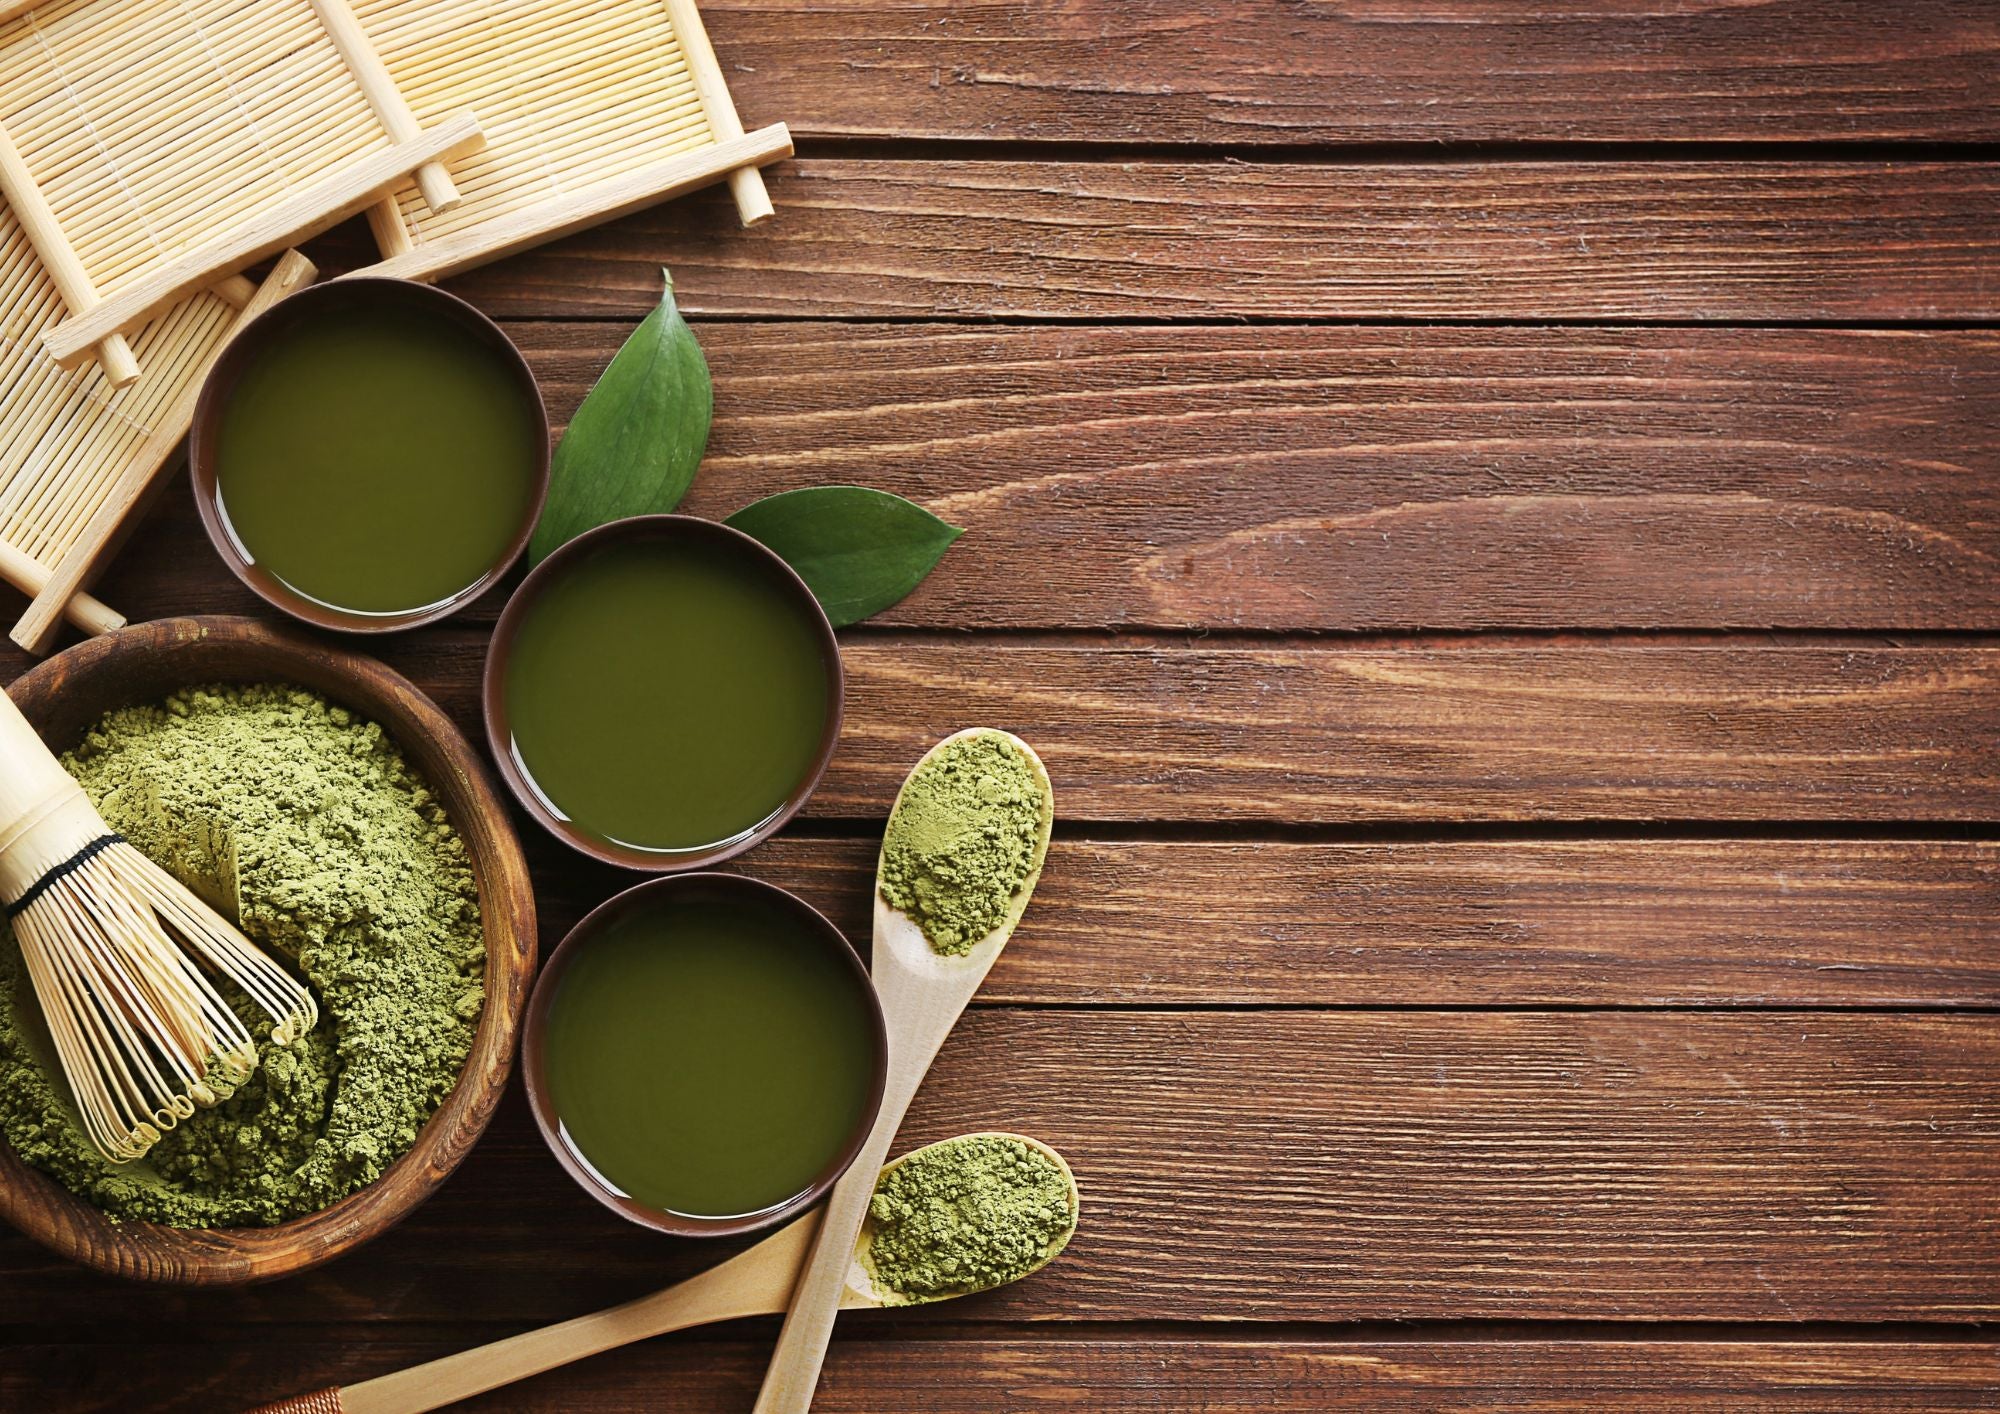 Matcha: What About Its Different Colors?